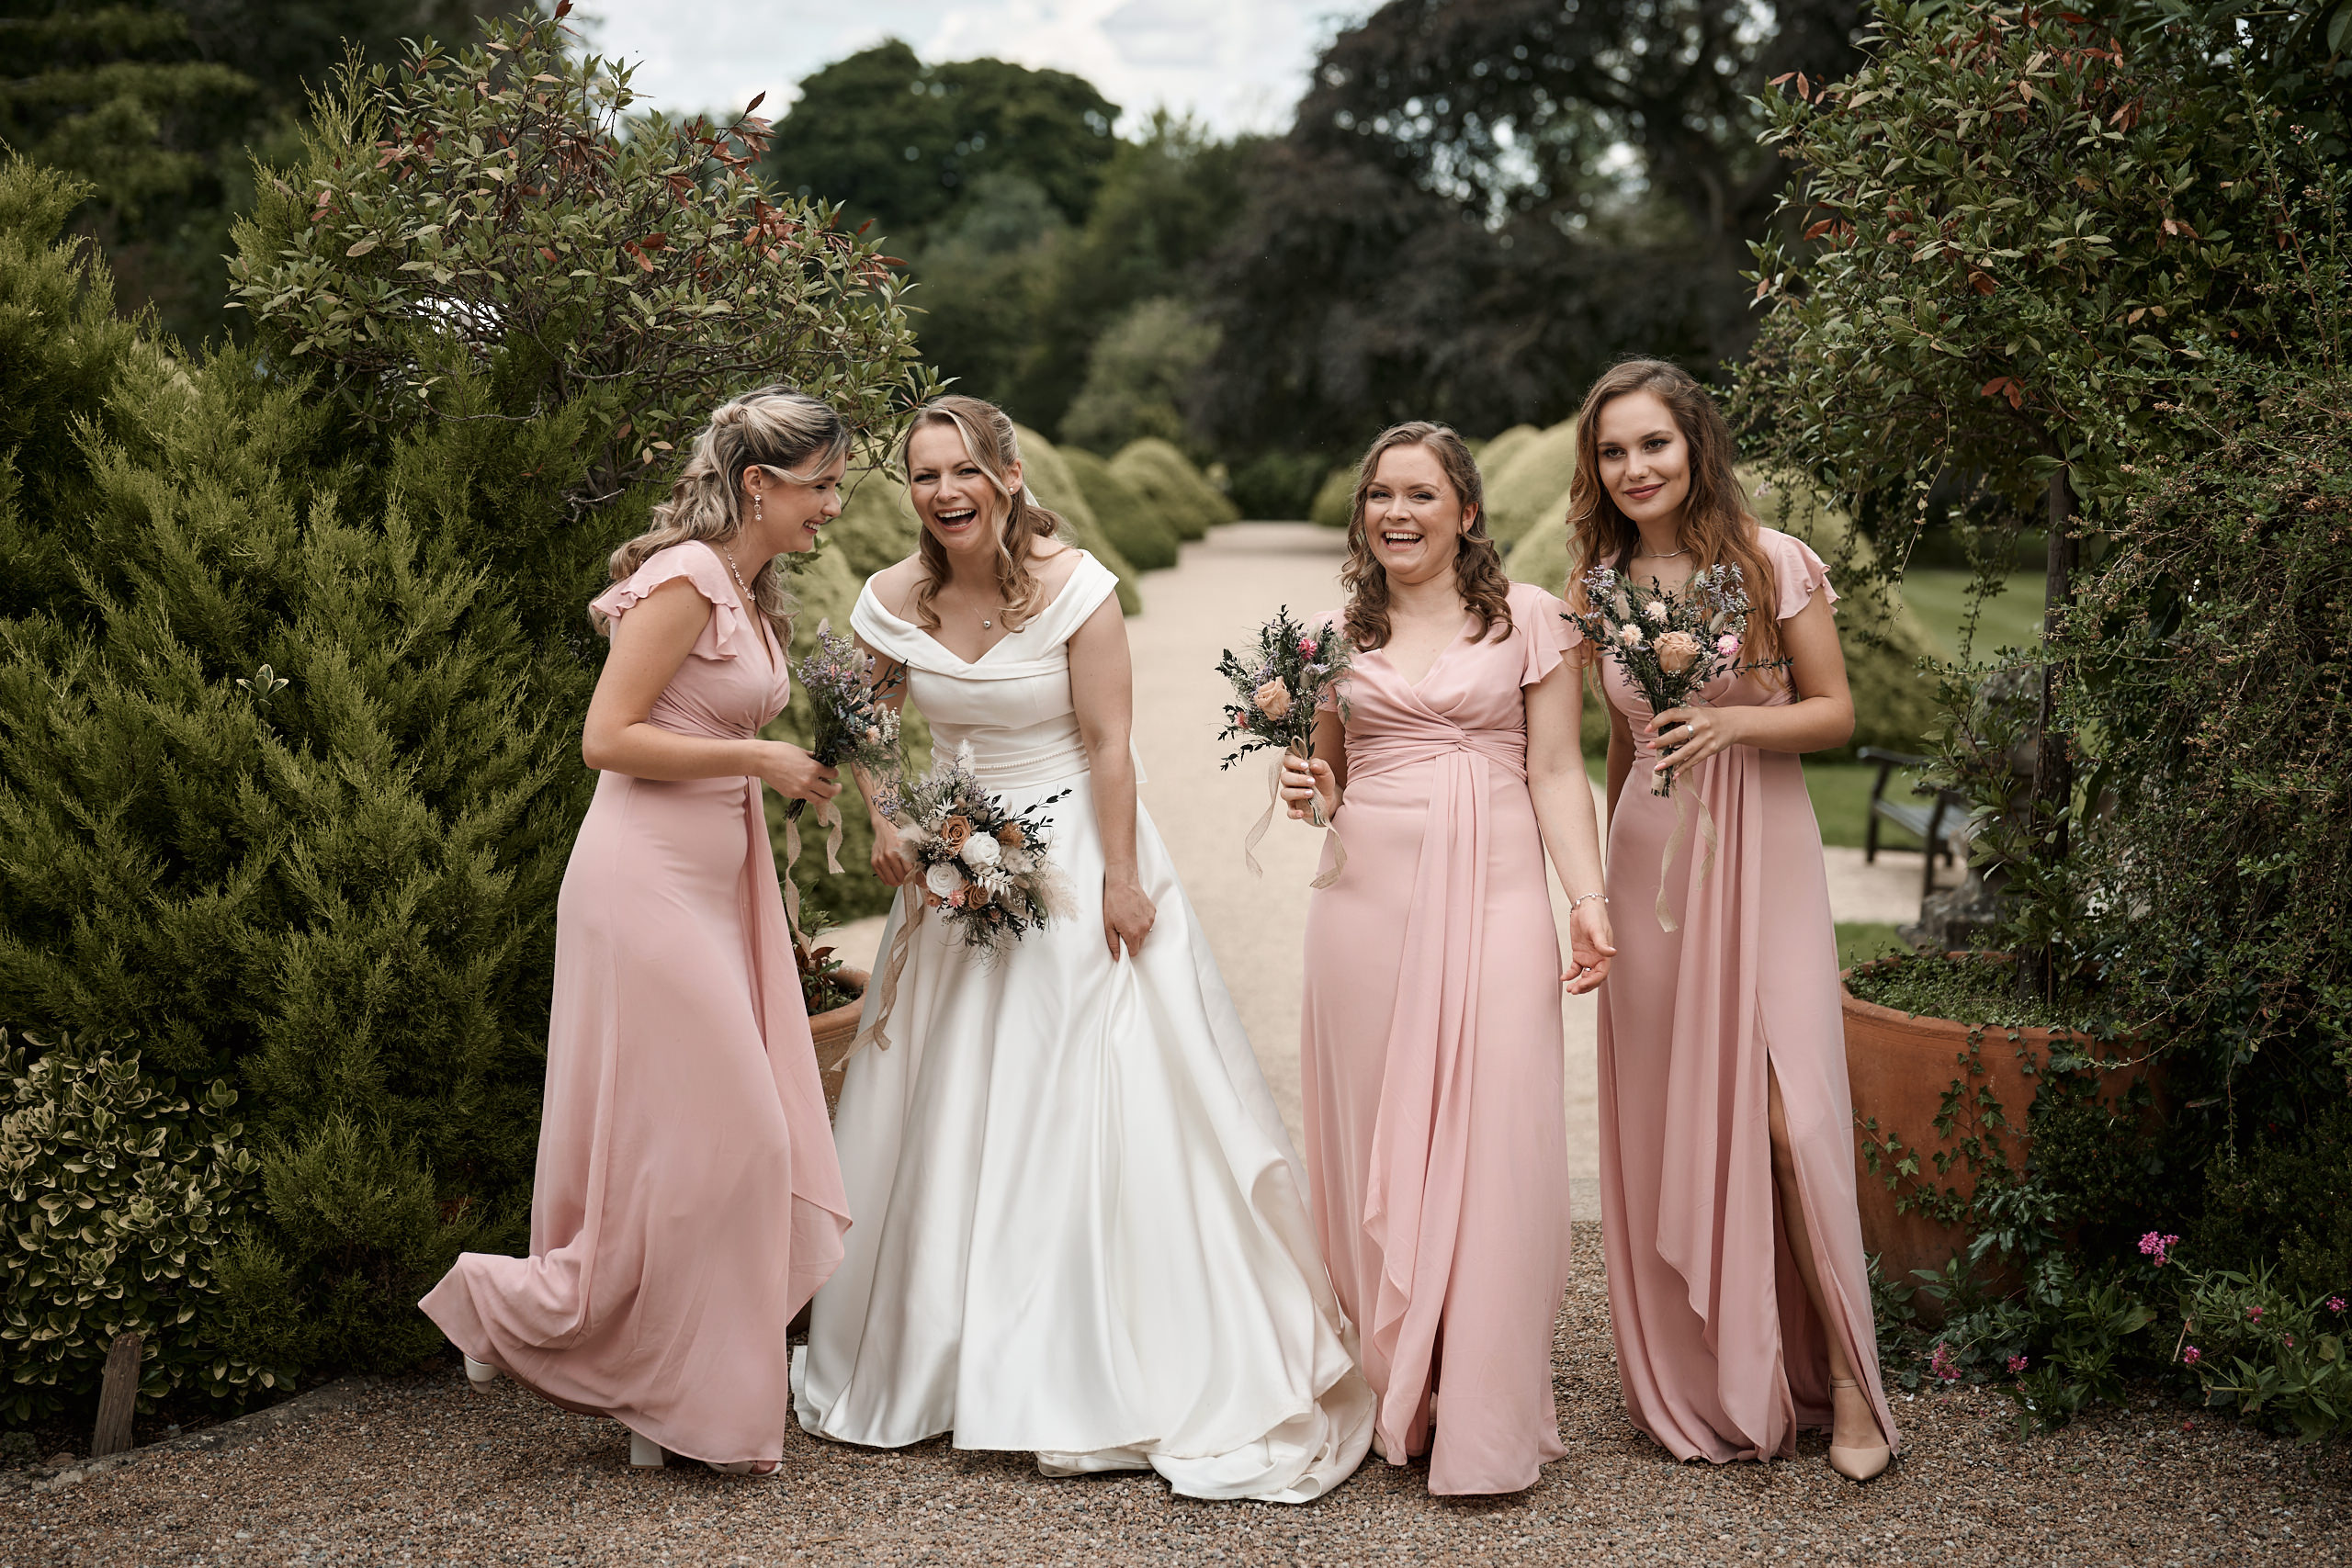 Four girls in pink bridesmaid dresses are in a garden.